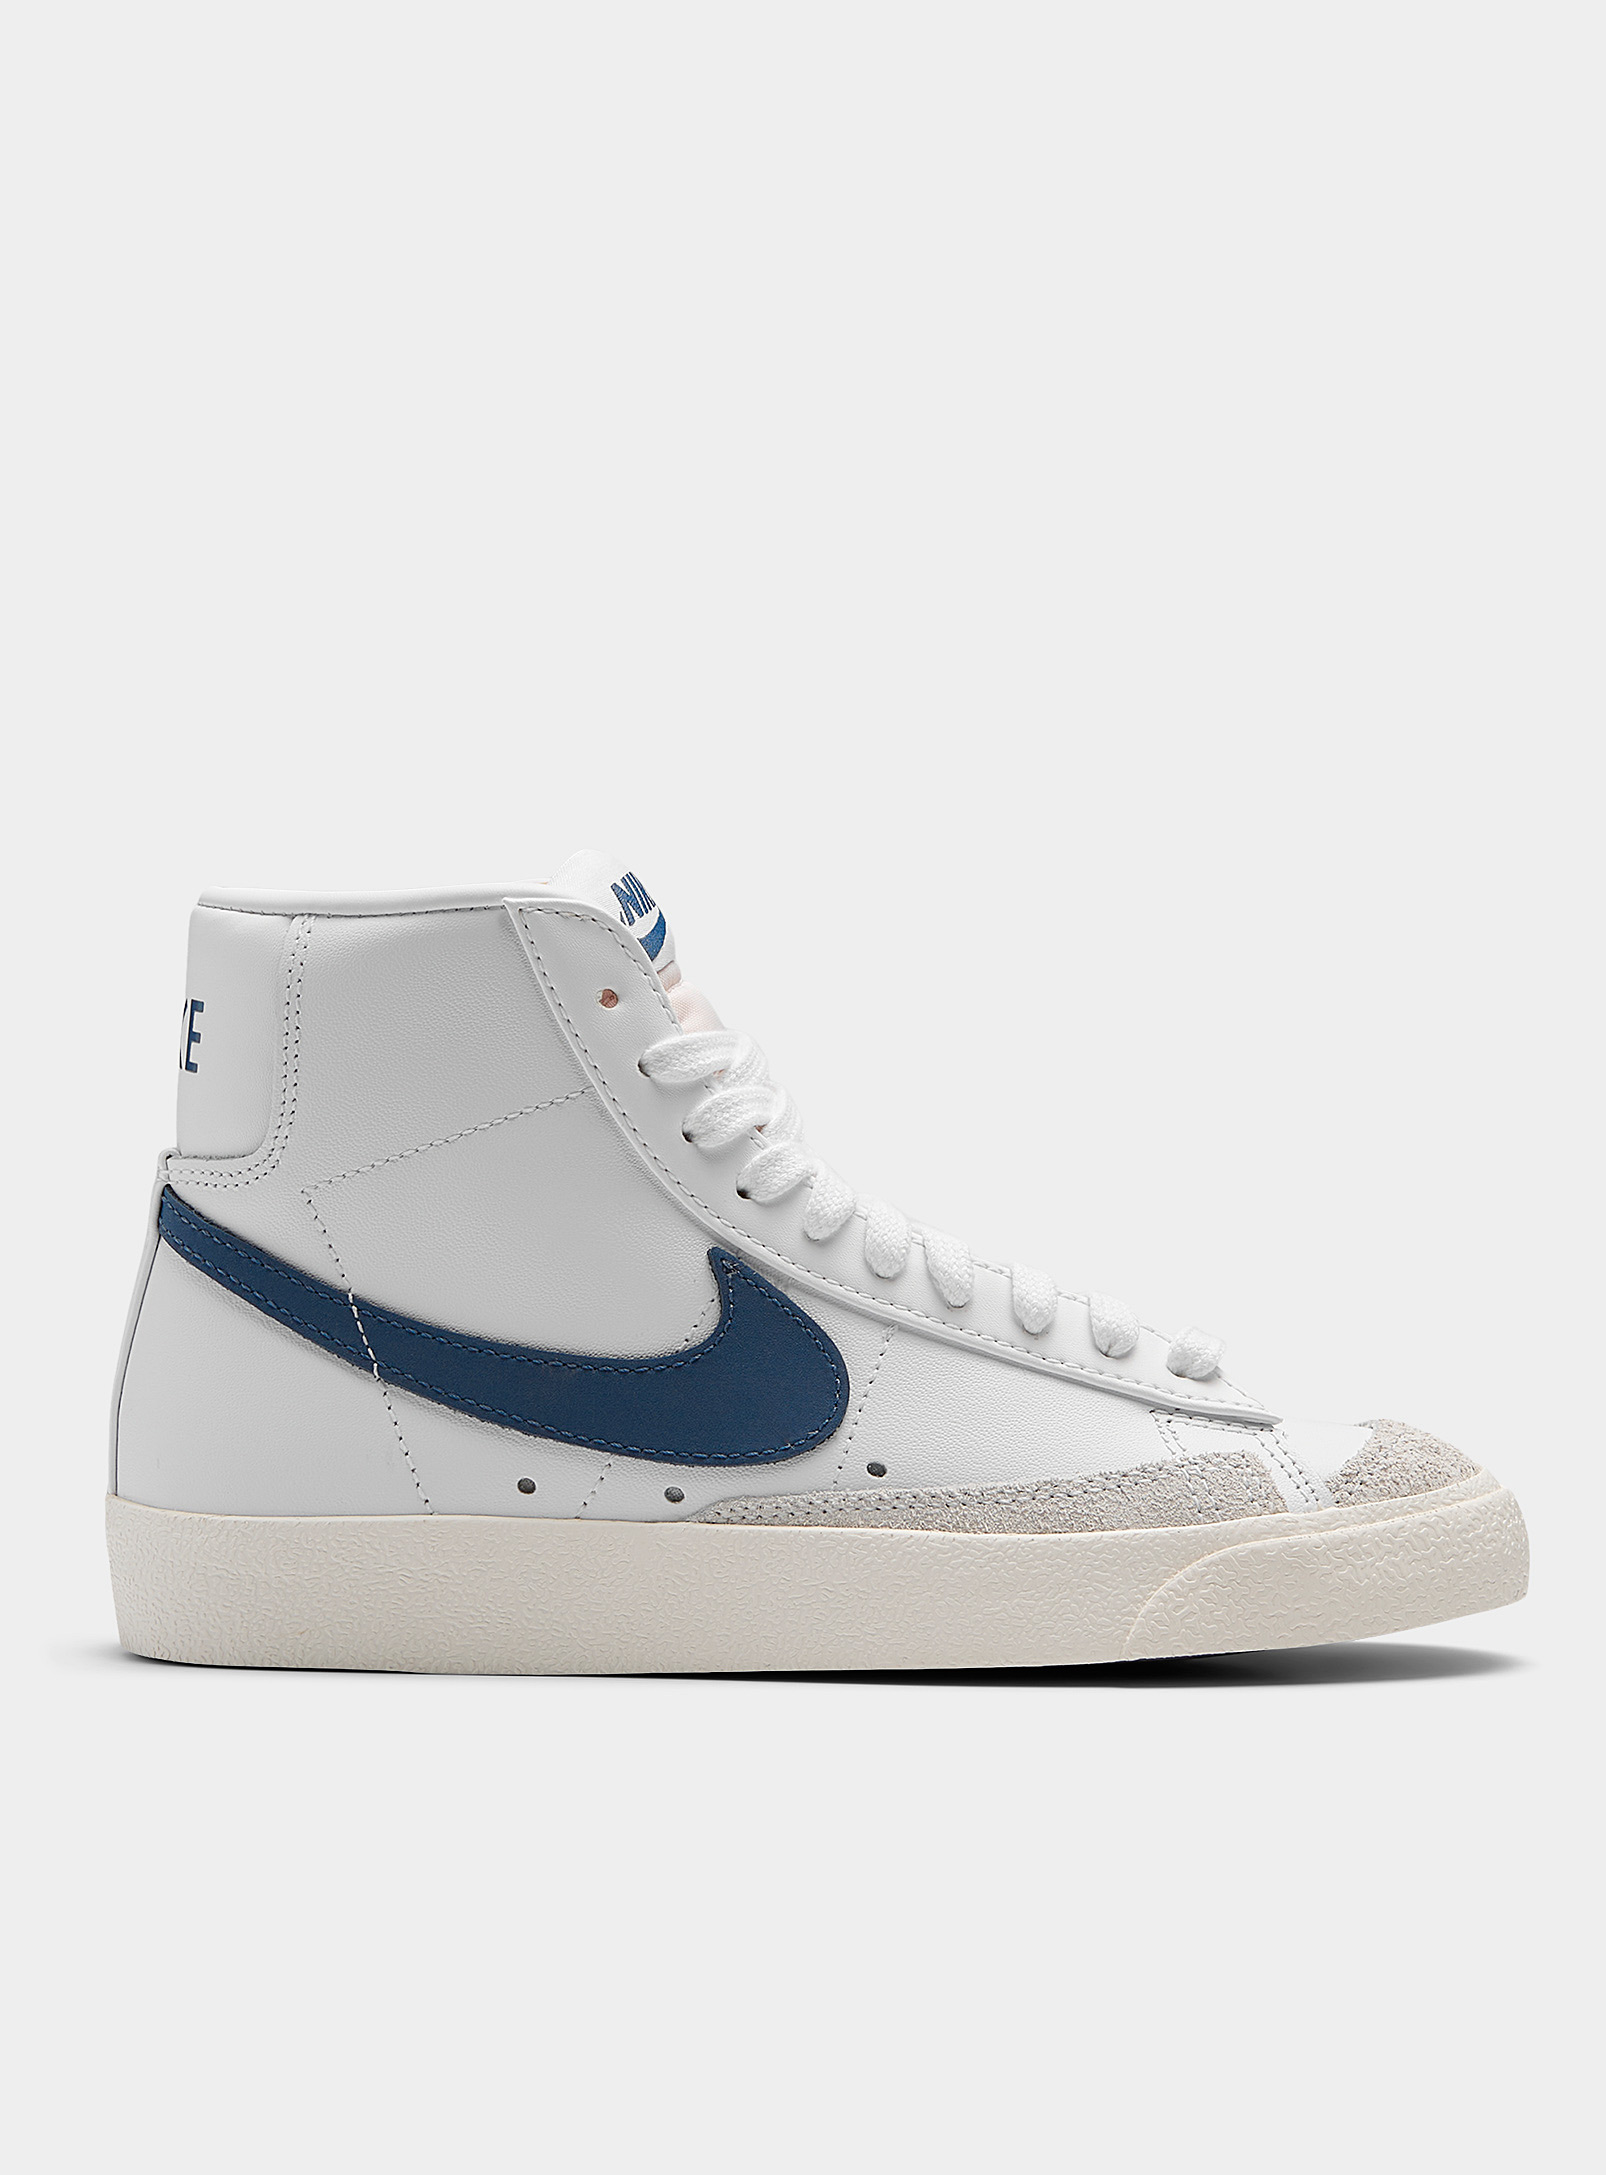 Nike Blazer Mid '77 Sneakers In White With Blue Detail